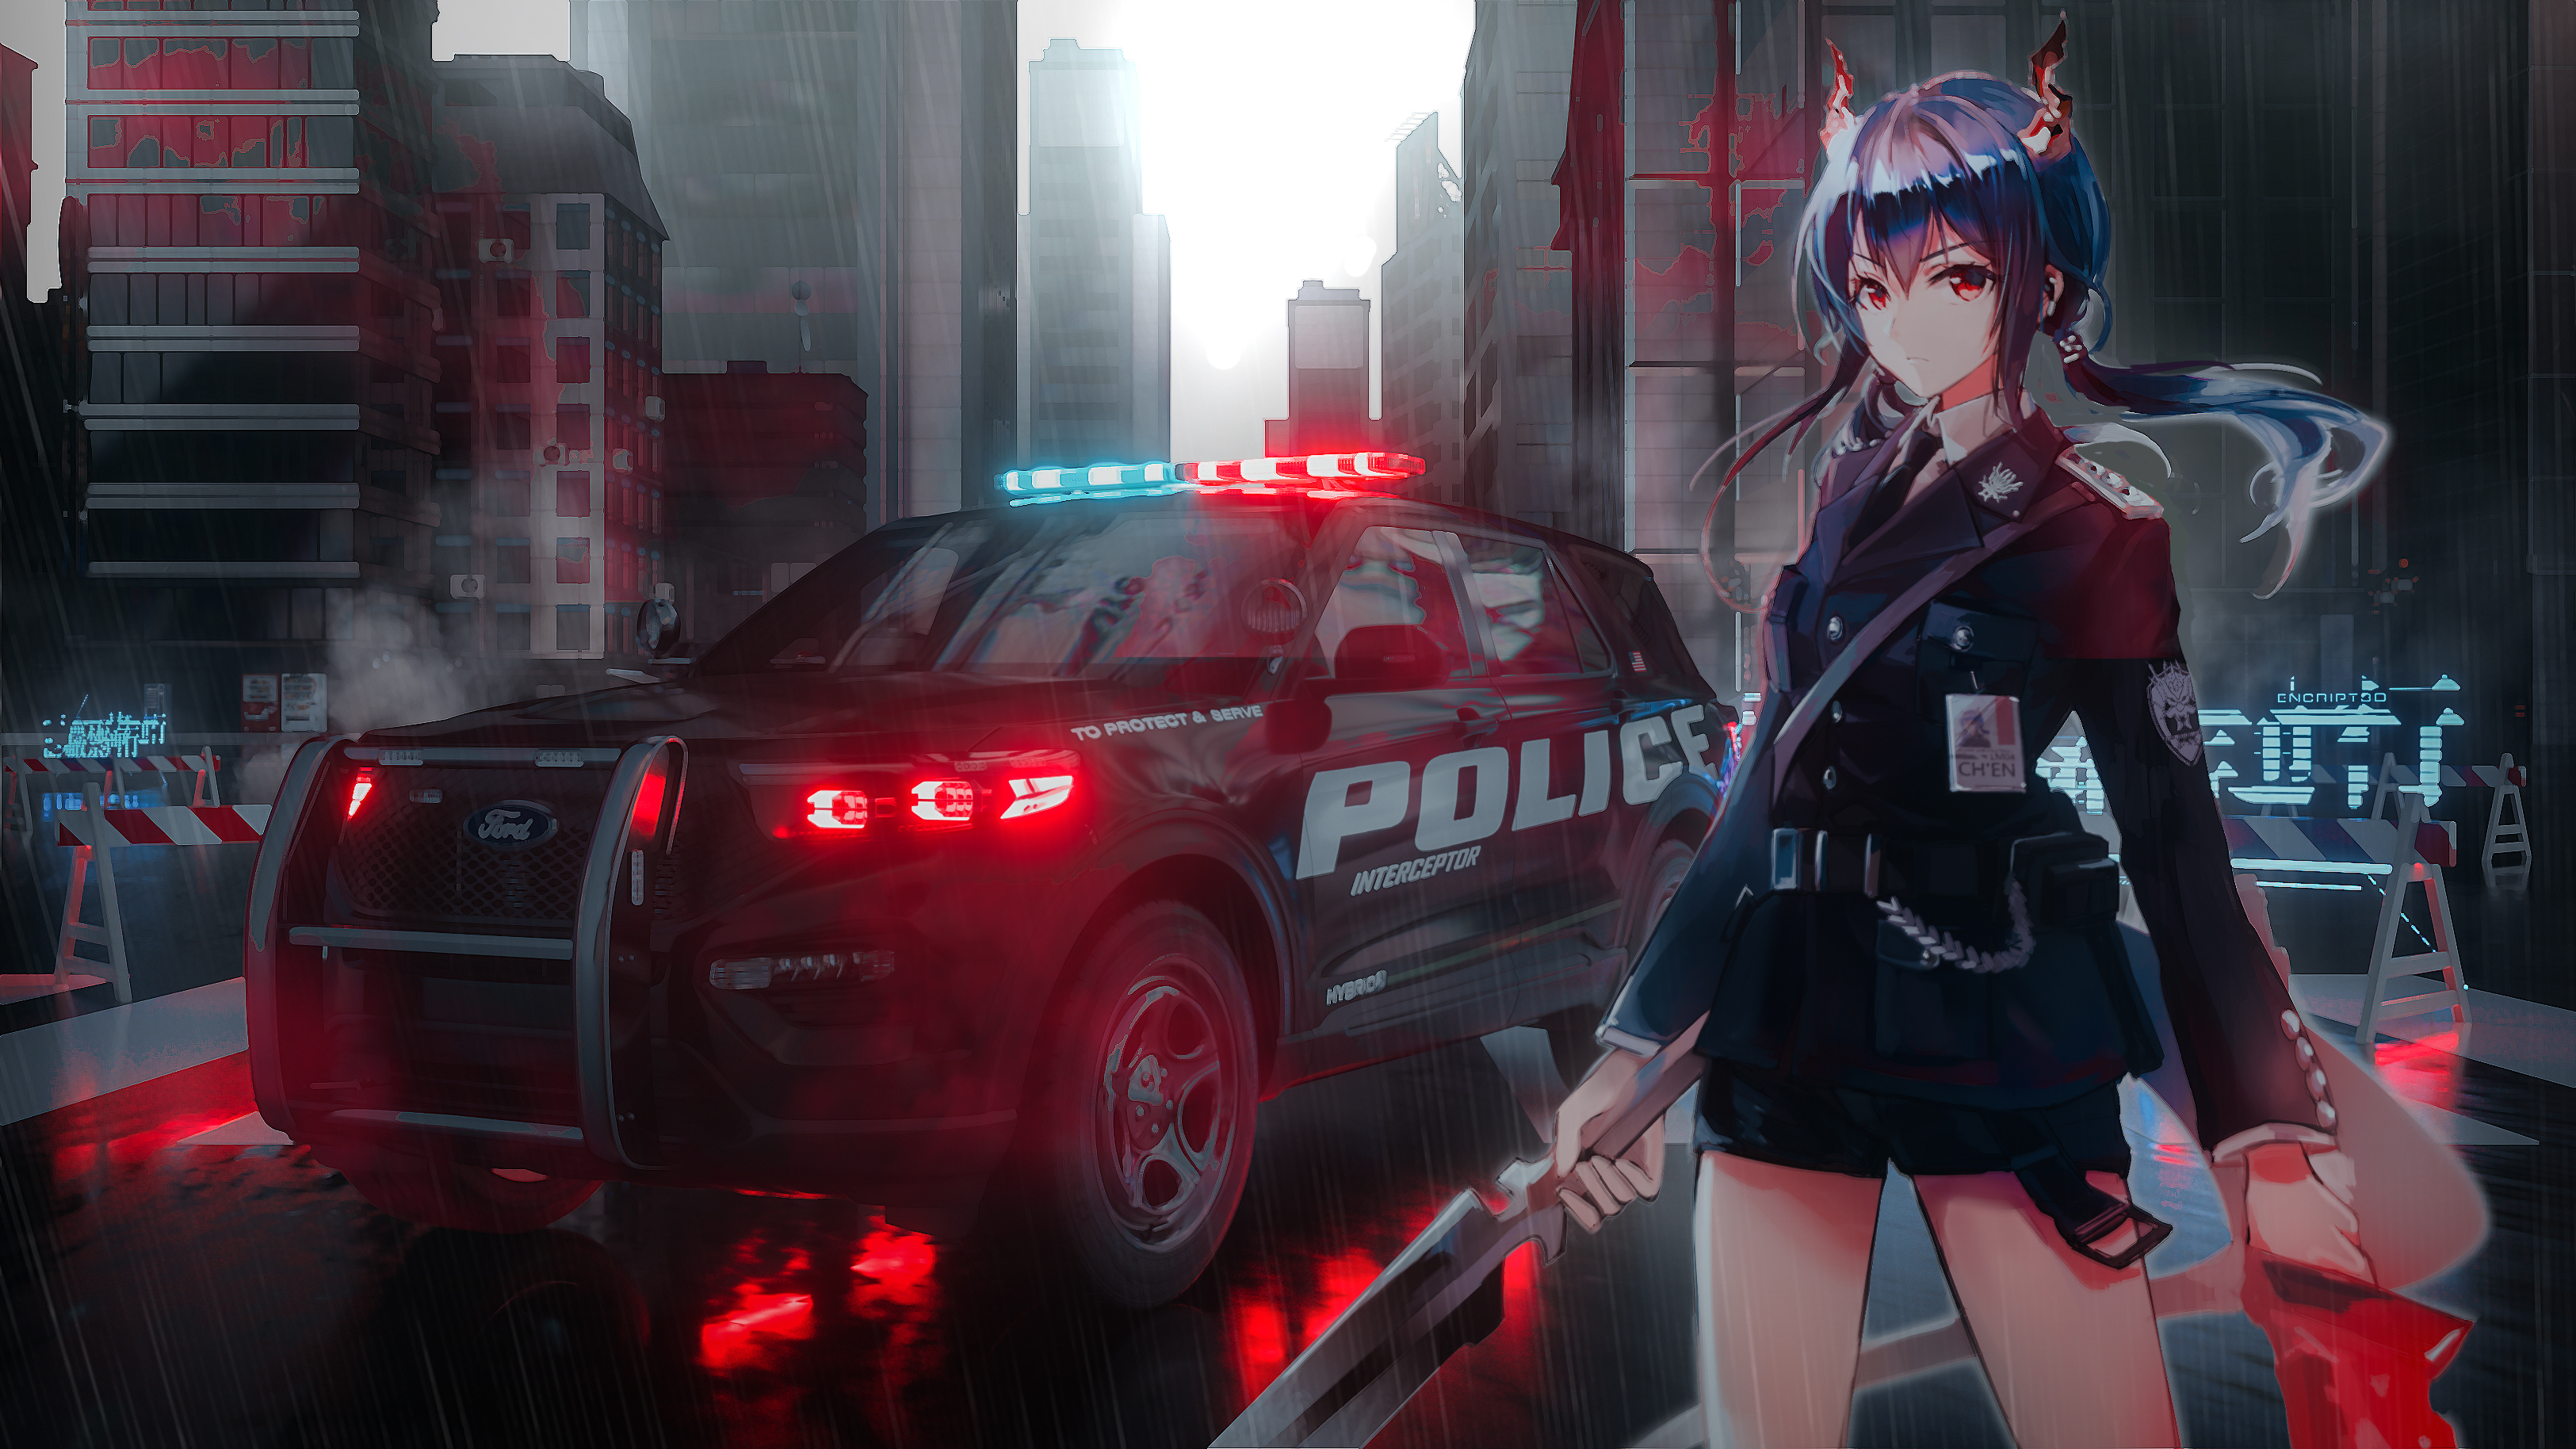 Anime Anime Girls Arknights Seymour Police Cars Chen Arknights 3250x1828